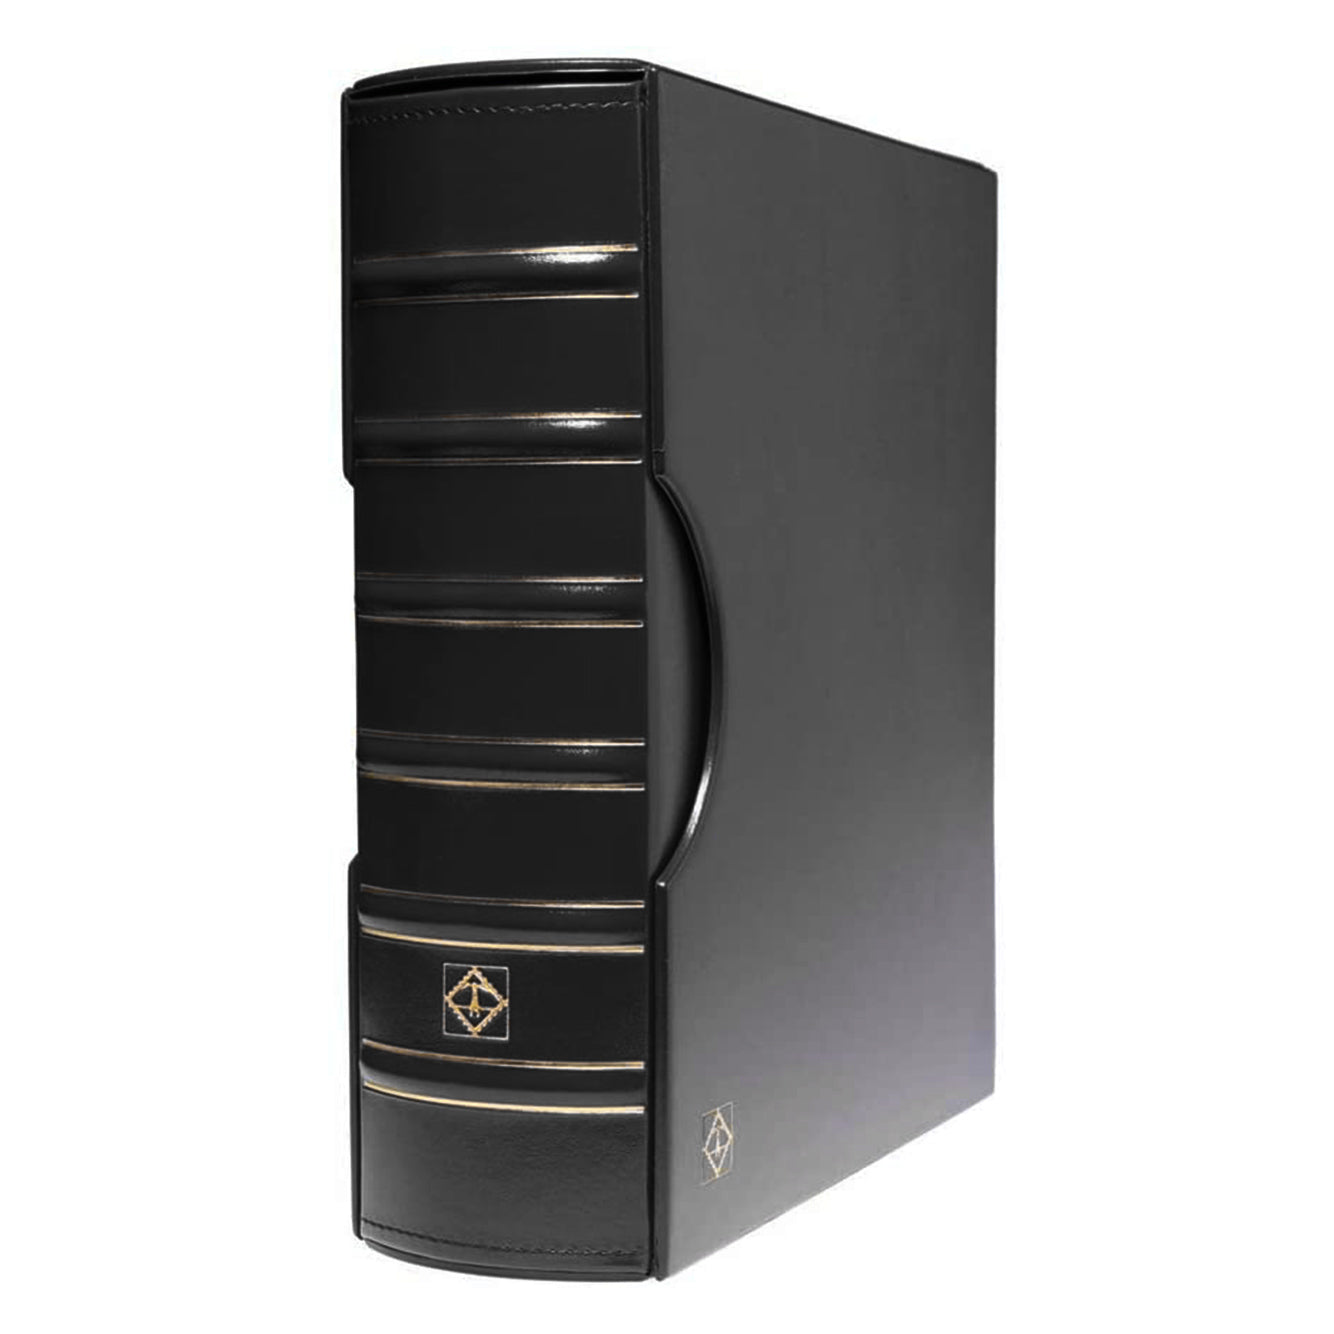 Grande G 4-Ring Binder with Slipcase for Storage of Coins, Stamps, Currency